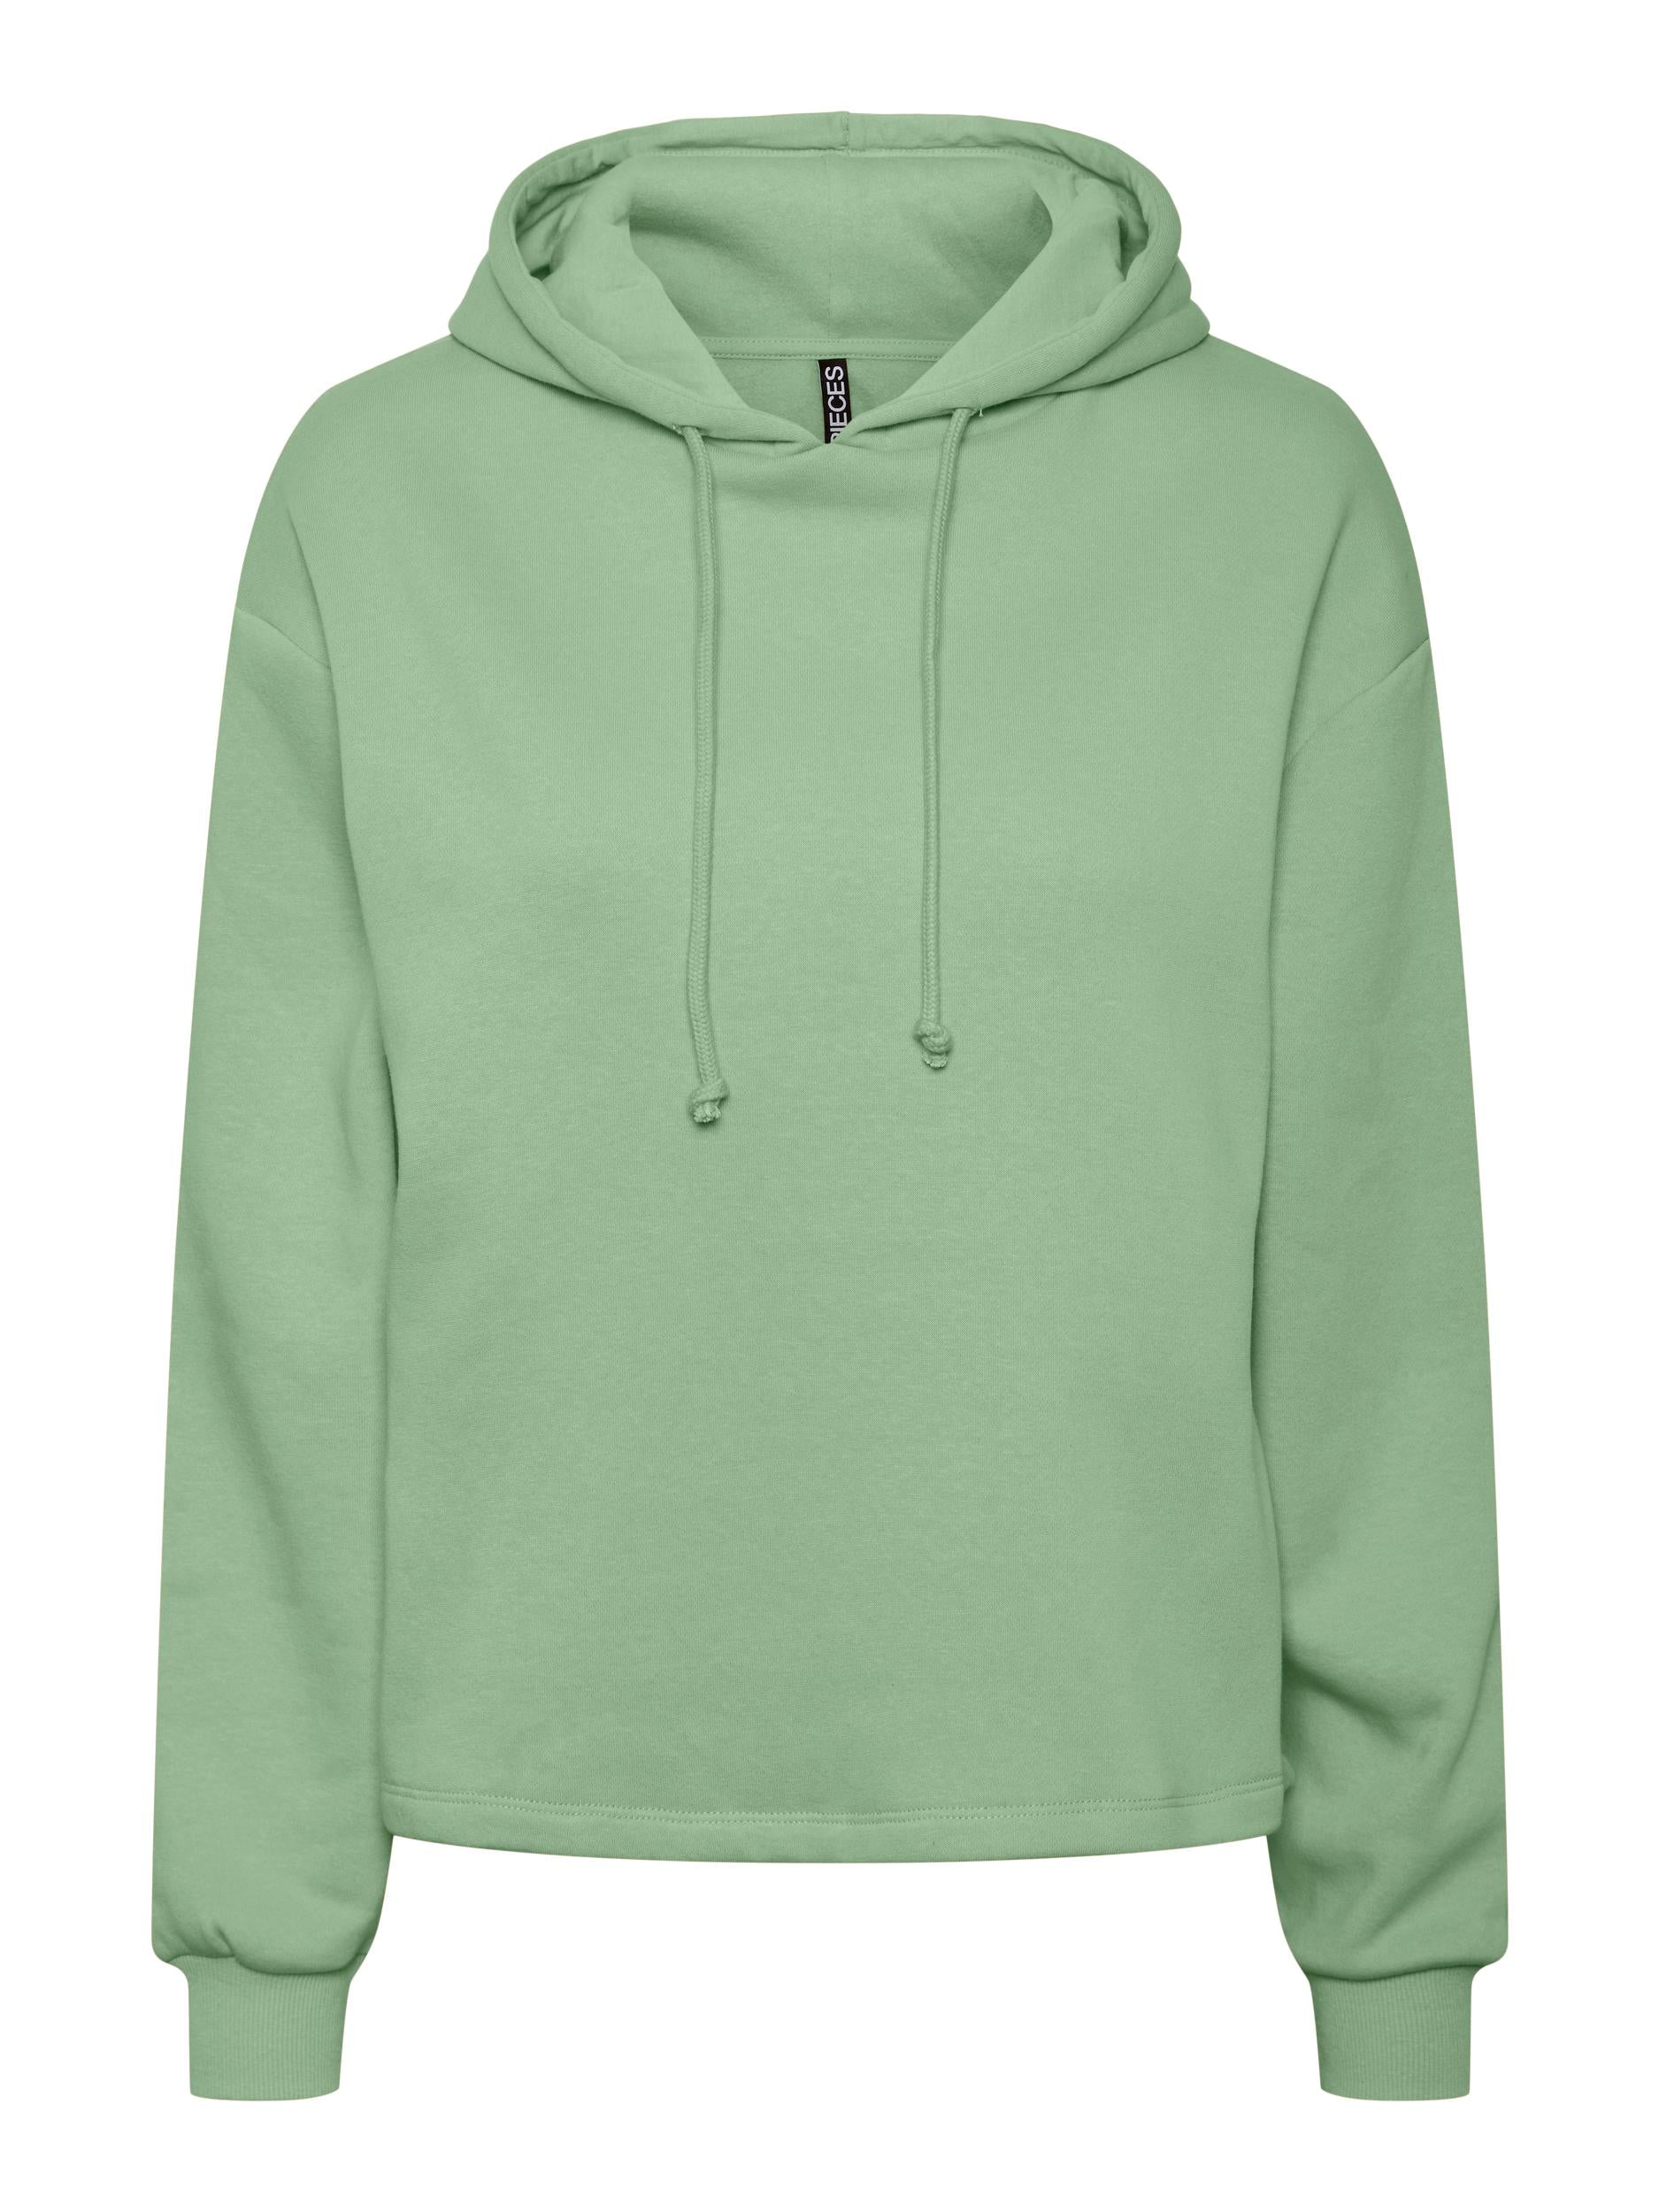 Pieces Chilli Hoodie- soft green